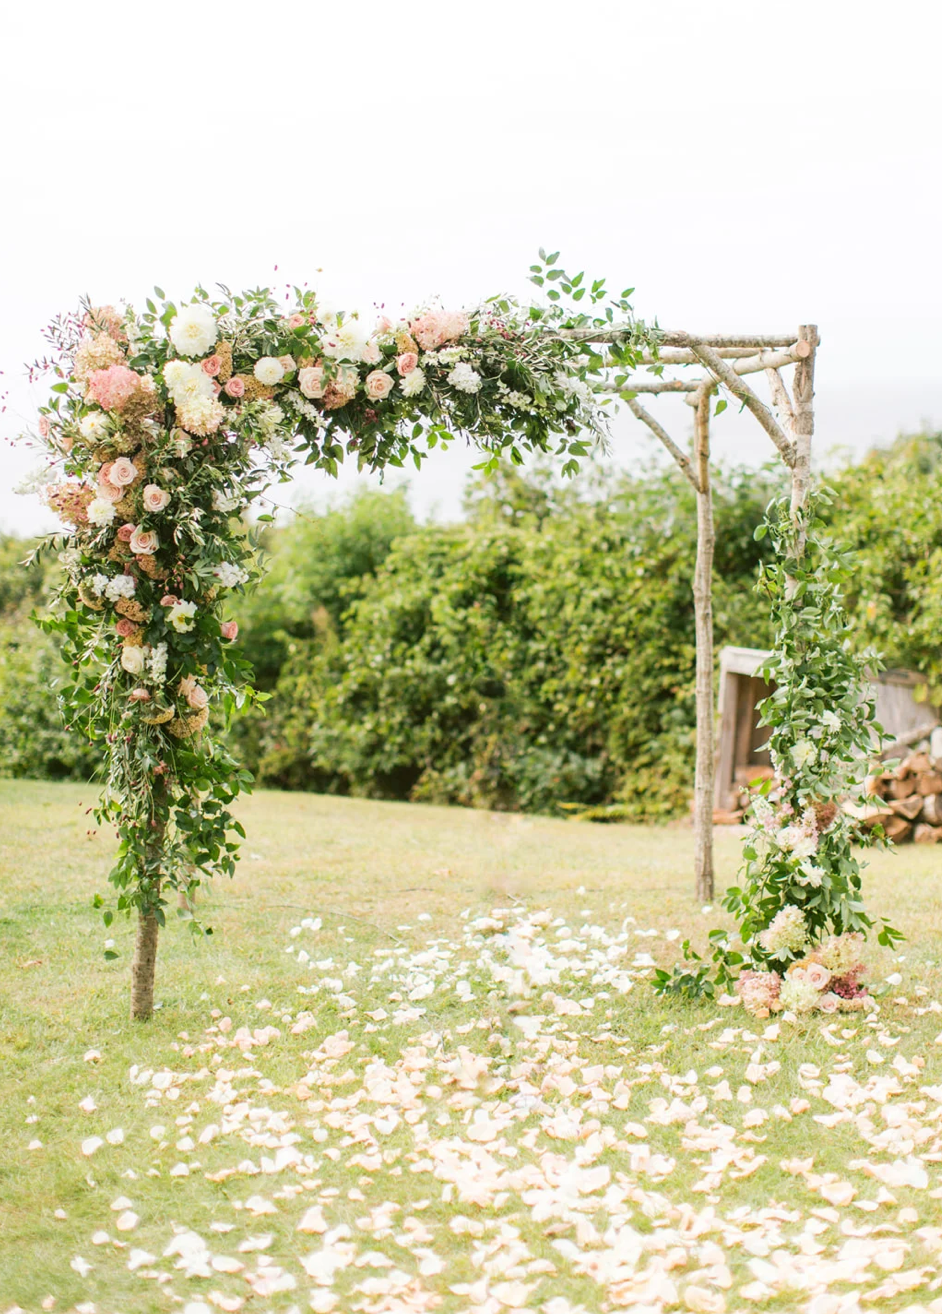 Wedding arch in peach and pink flowers created by Carmel florist for wedding at Carmel Valley Ranch